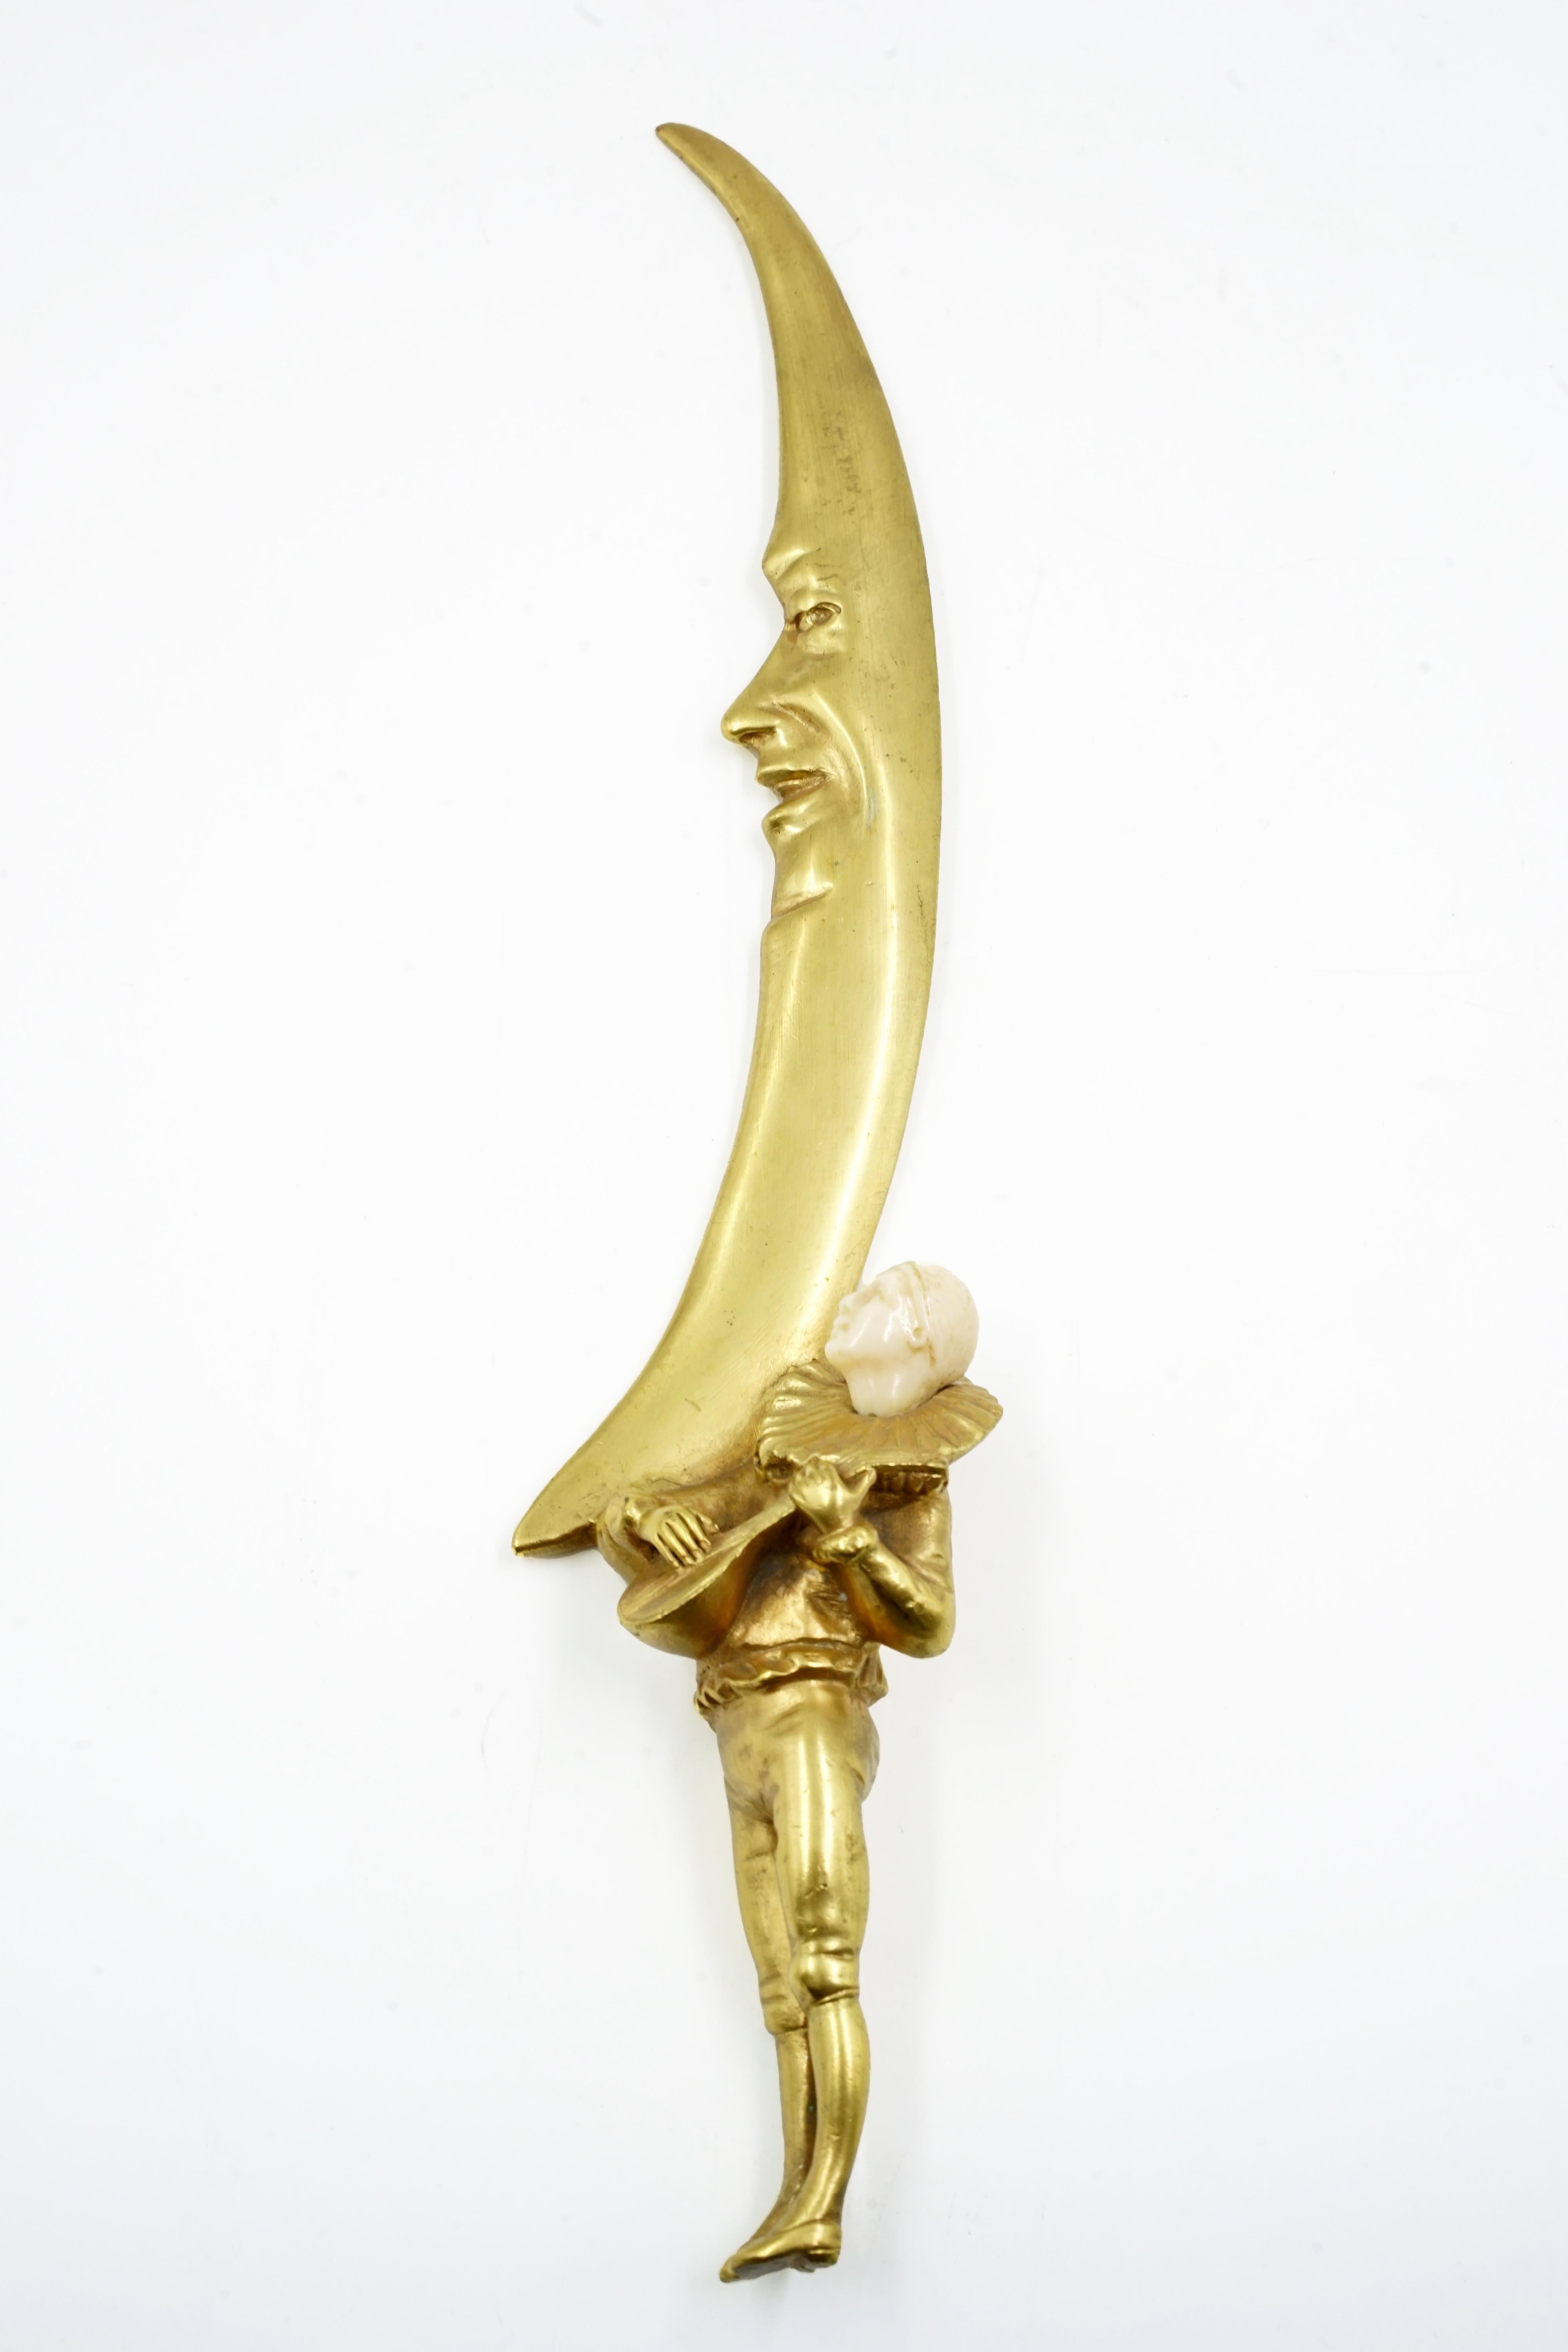 Letter Opener by George Omerth
Origin France Circa 1920
art deco style
Excellent condition
Gilt bronze and patina
Omerth's life dates are not known in literature. He was a student of the sculptor Albert-Ernest Carrier-Belleuse, was active as an